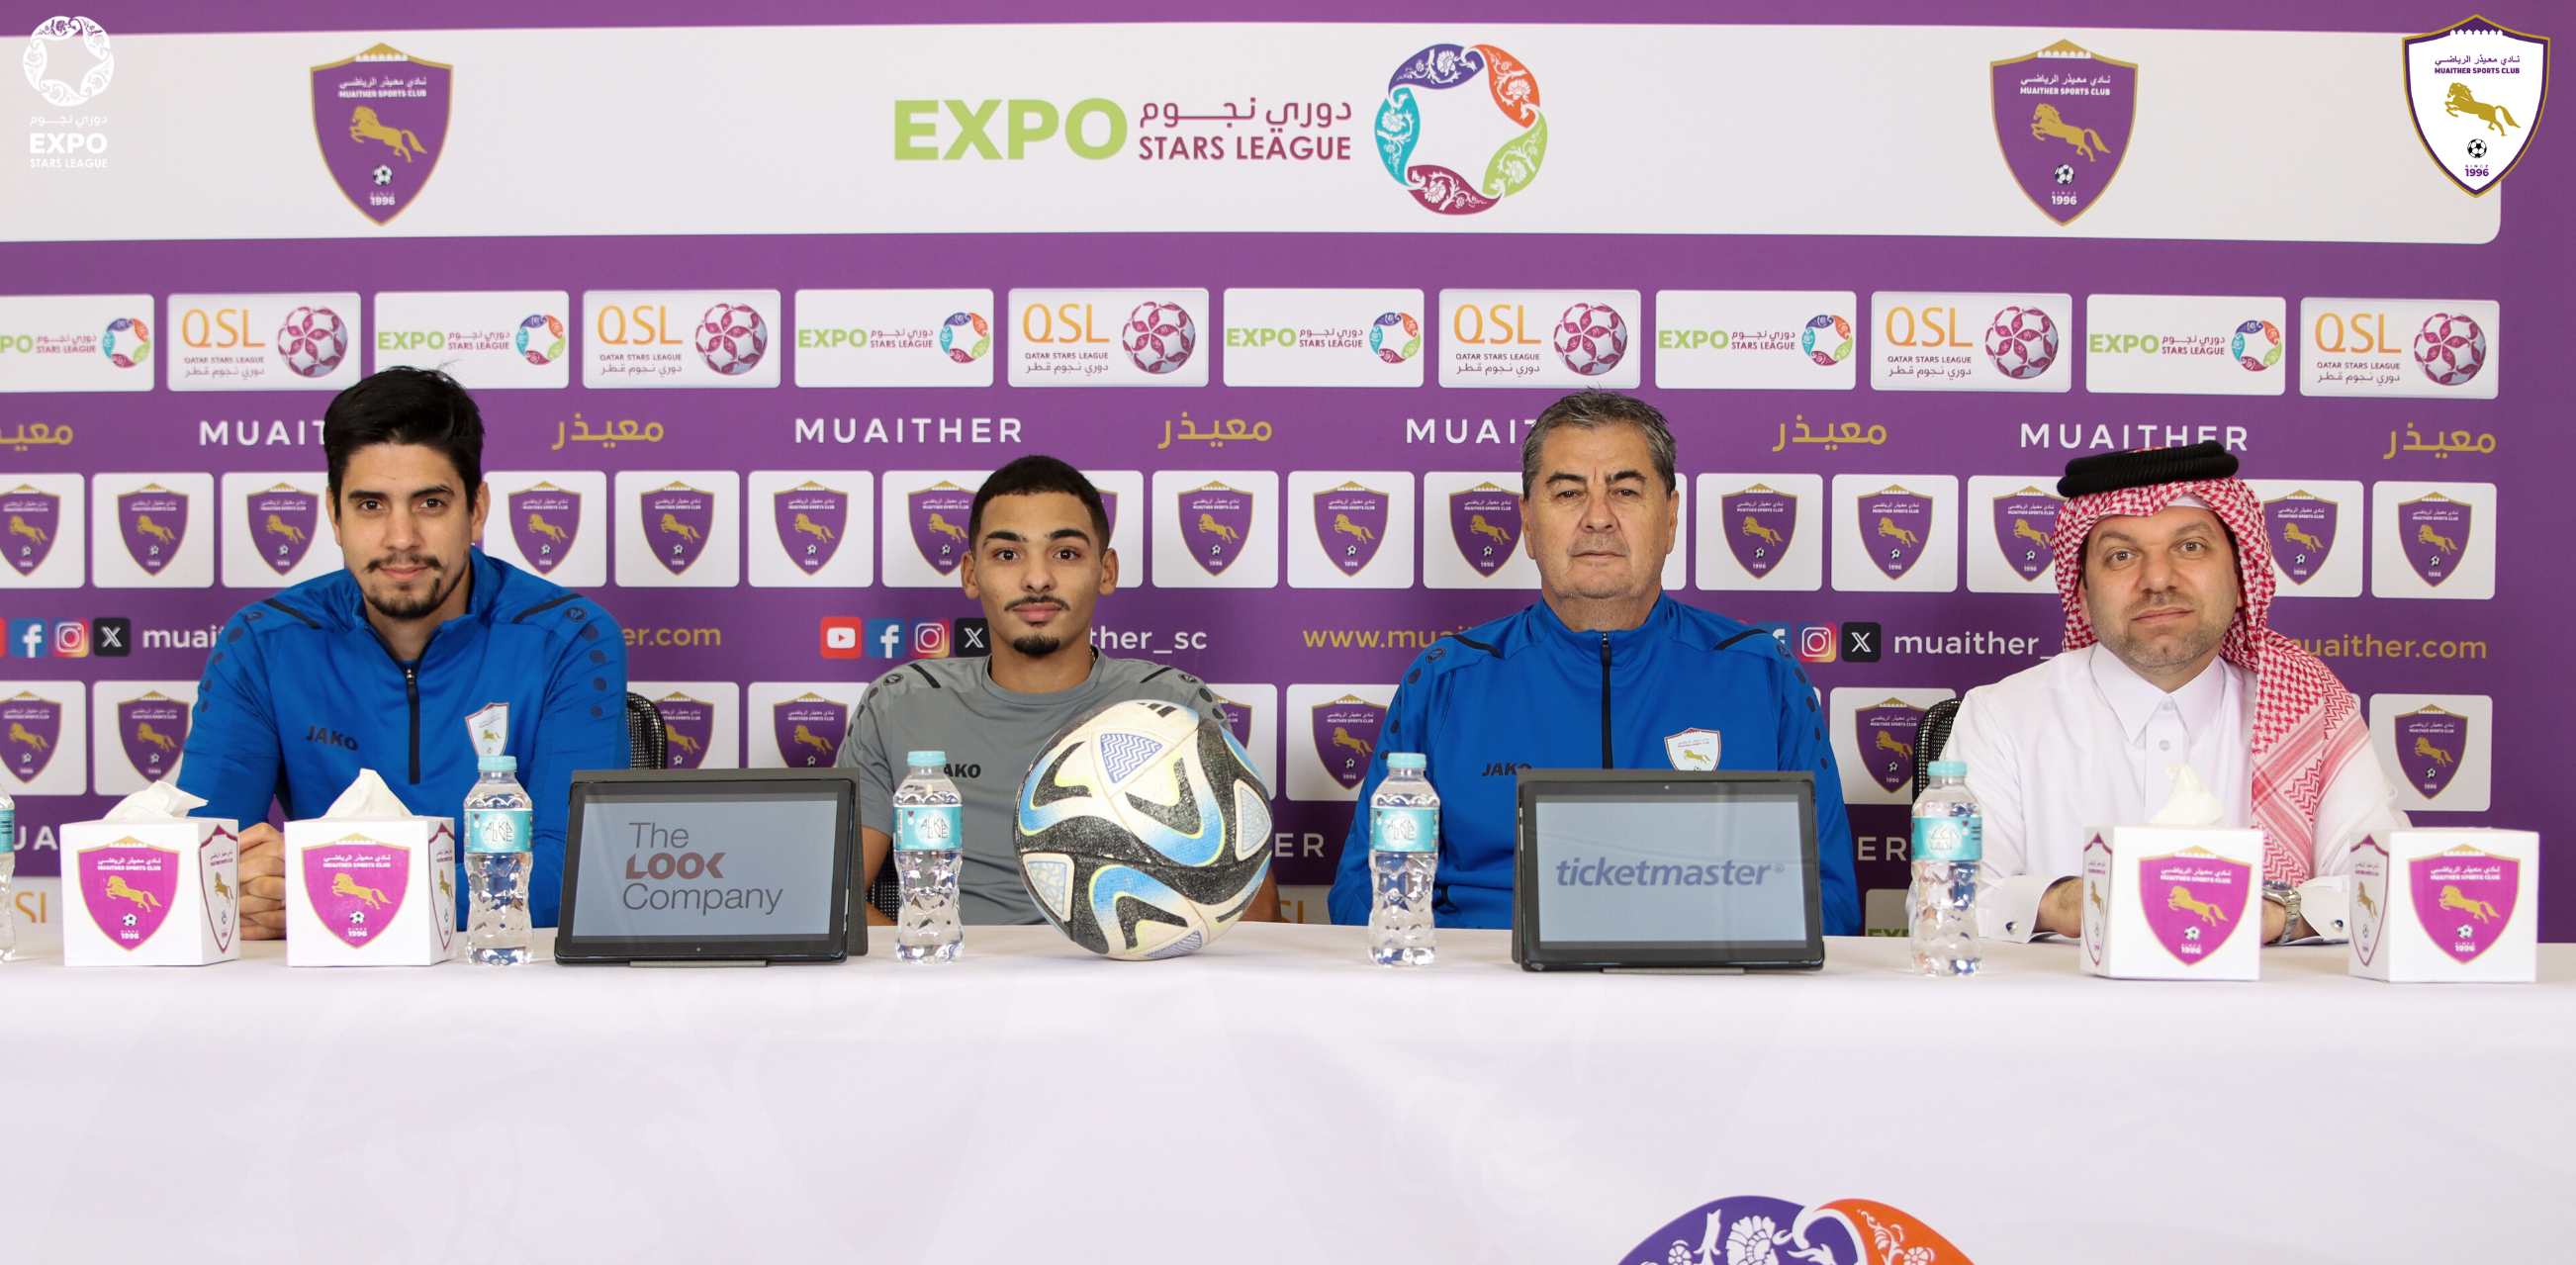 Jorge da Silva: The match with Qatar S.C is very important and there is no substitute than victory